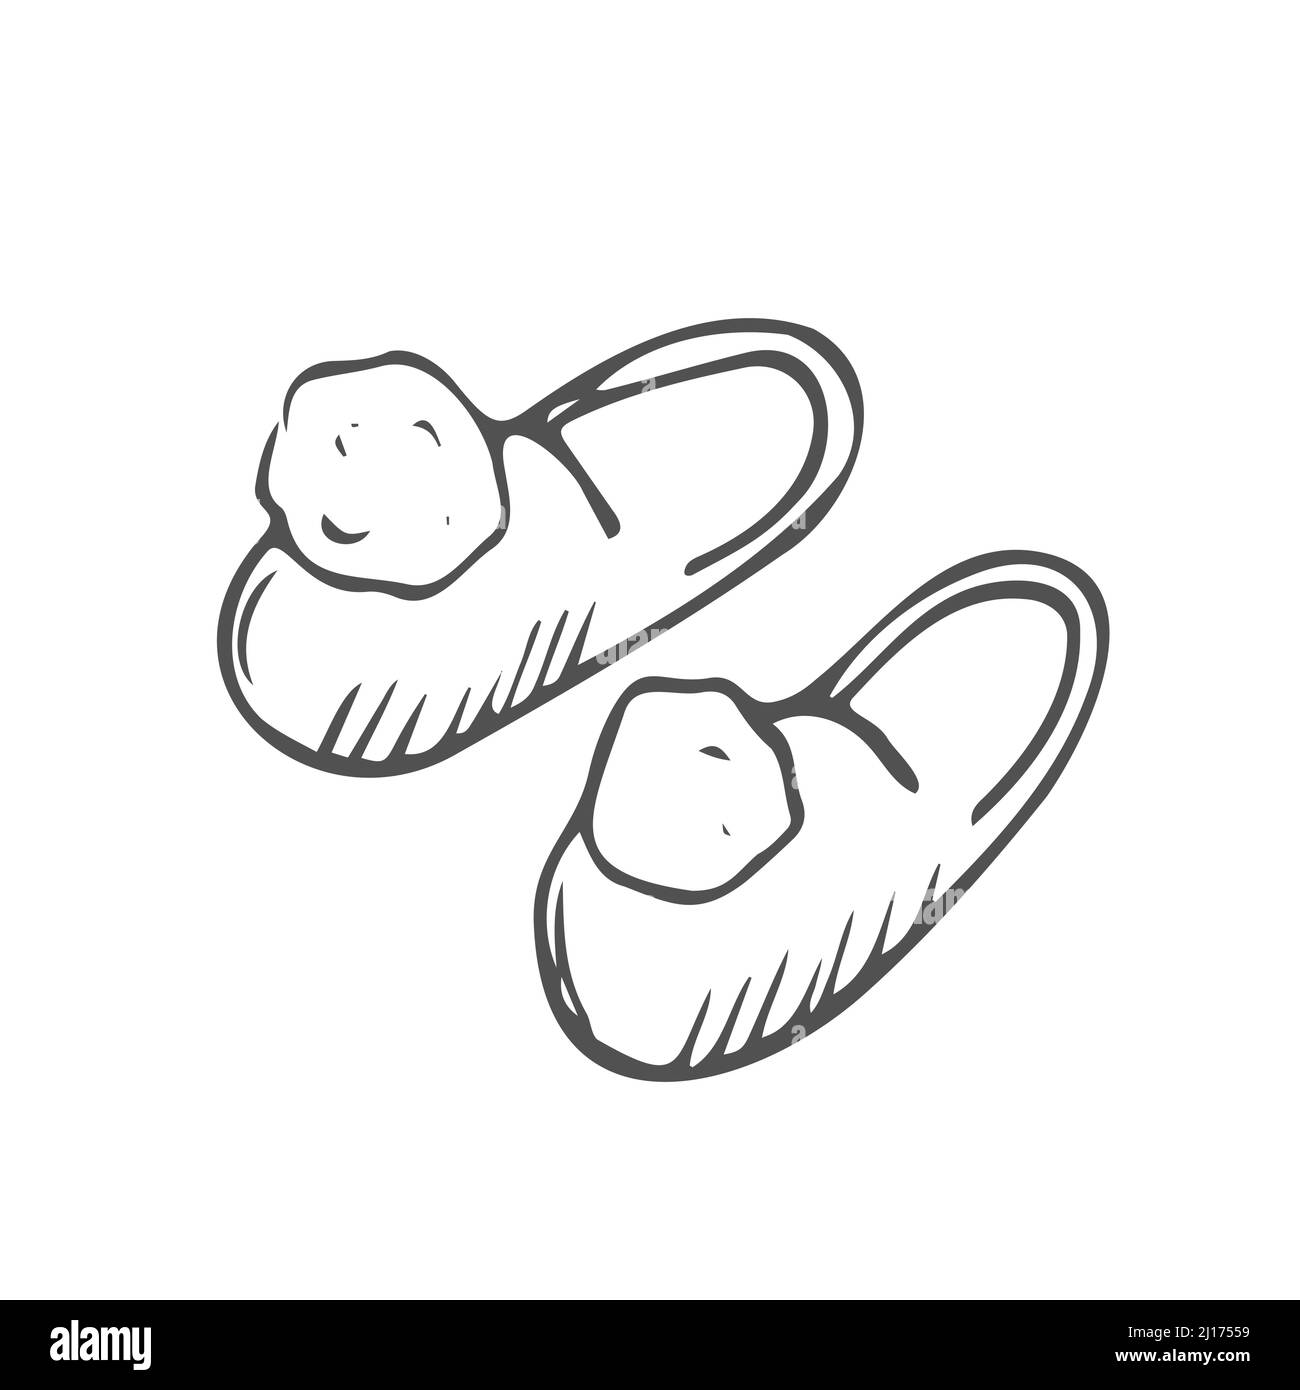 Top Rubber Slippers Drawings Stock Vectors Illustrations  Clip Art   iStock